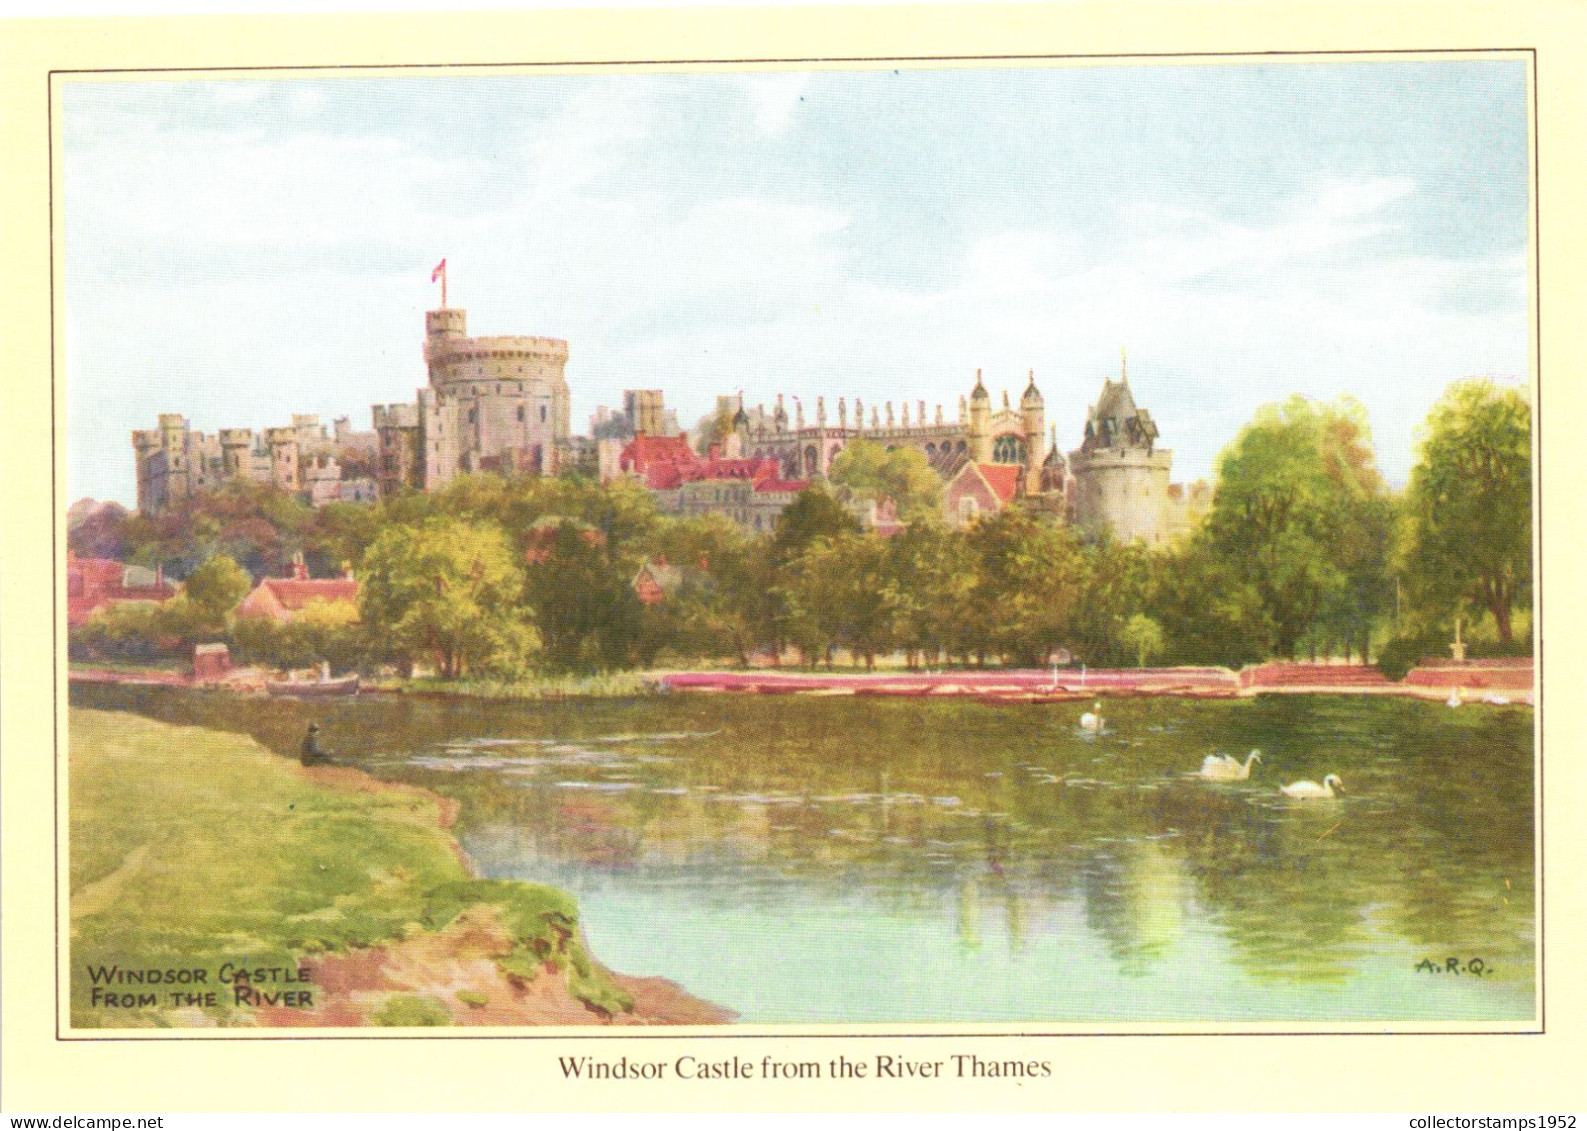 PAINTING, WINDSOR CASTLE FROM THE RIVER THAMES, QUINTON, POSTCARD - Quinton, AR